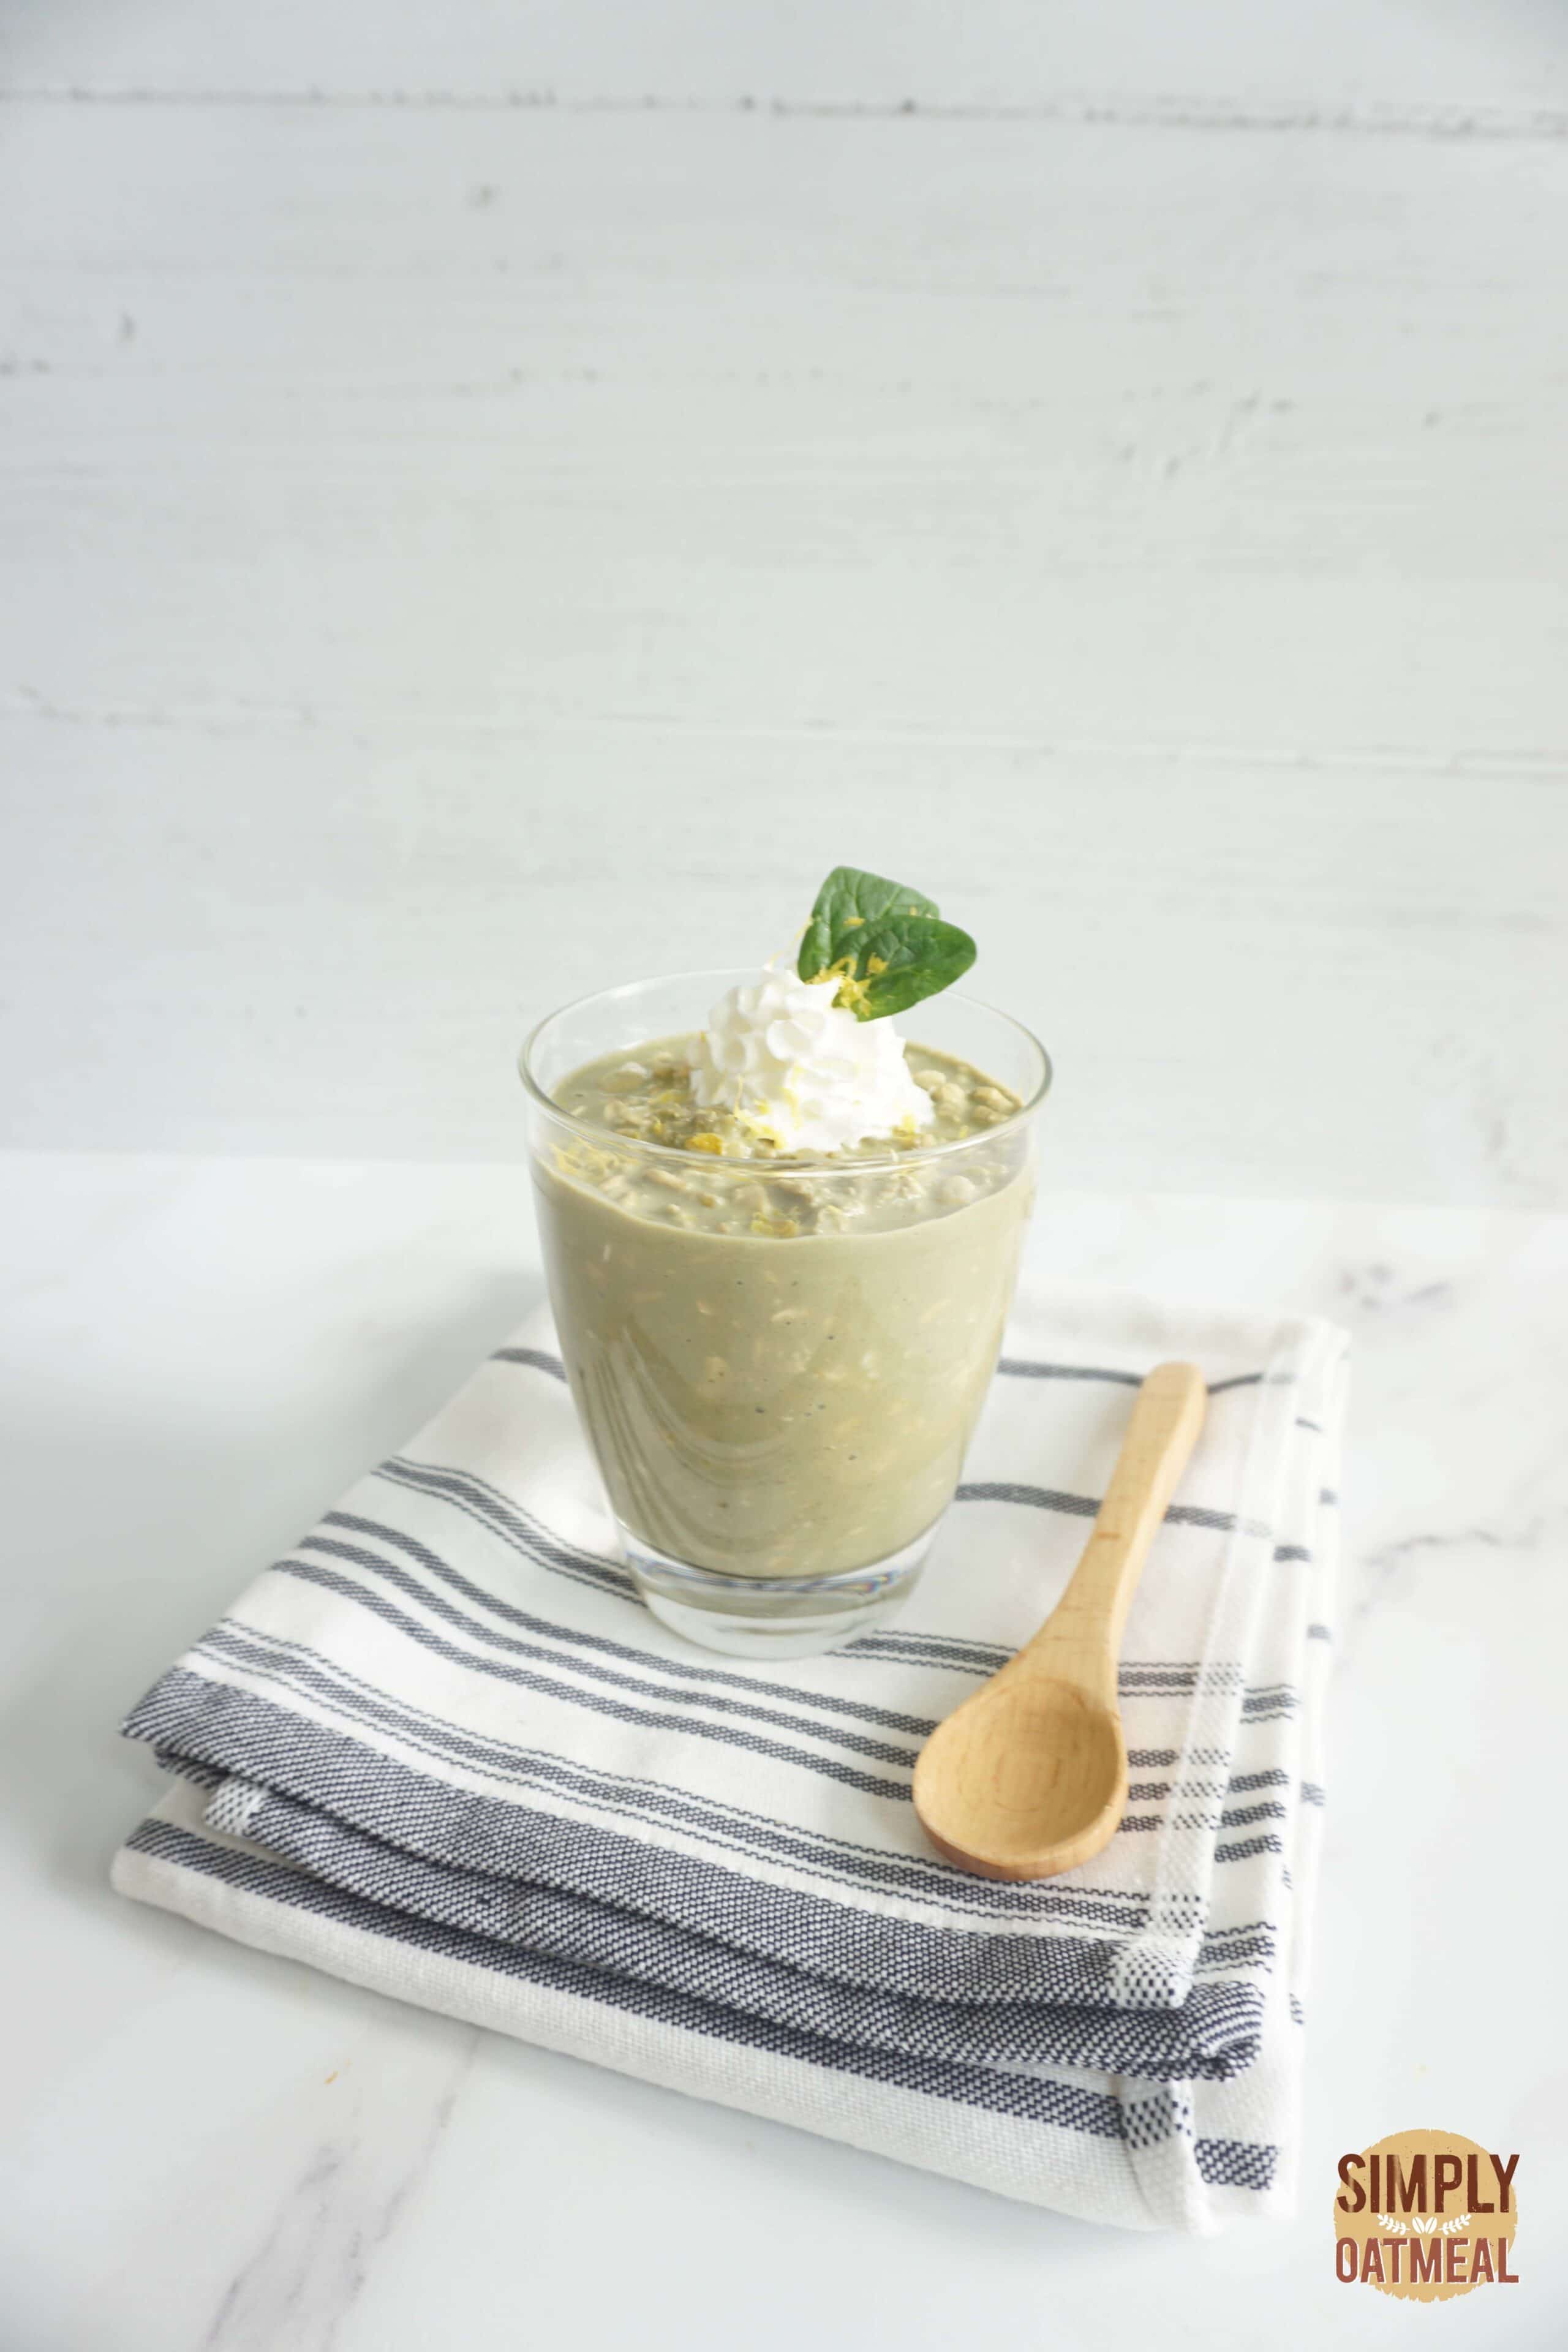 Green tea lemonade overnight oats served in a glass cup with sliced lemon and macha powder